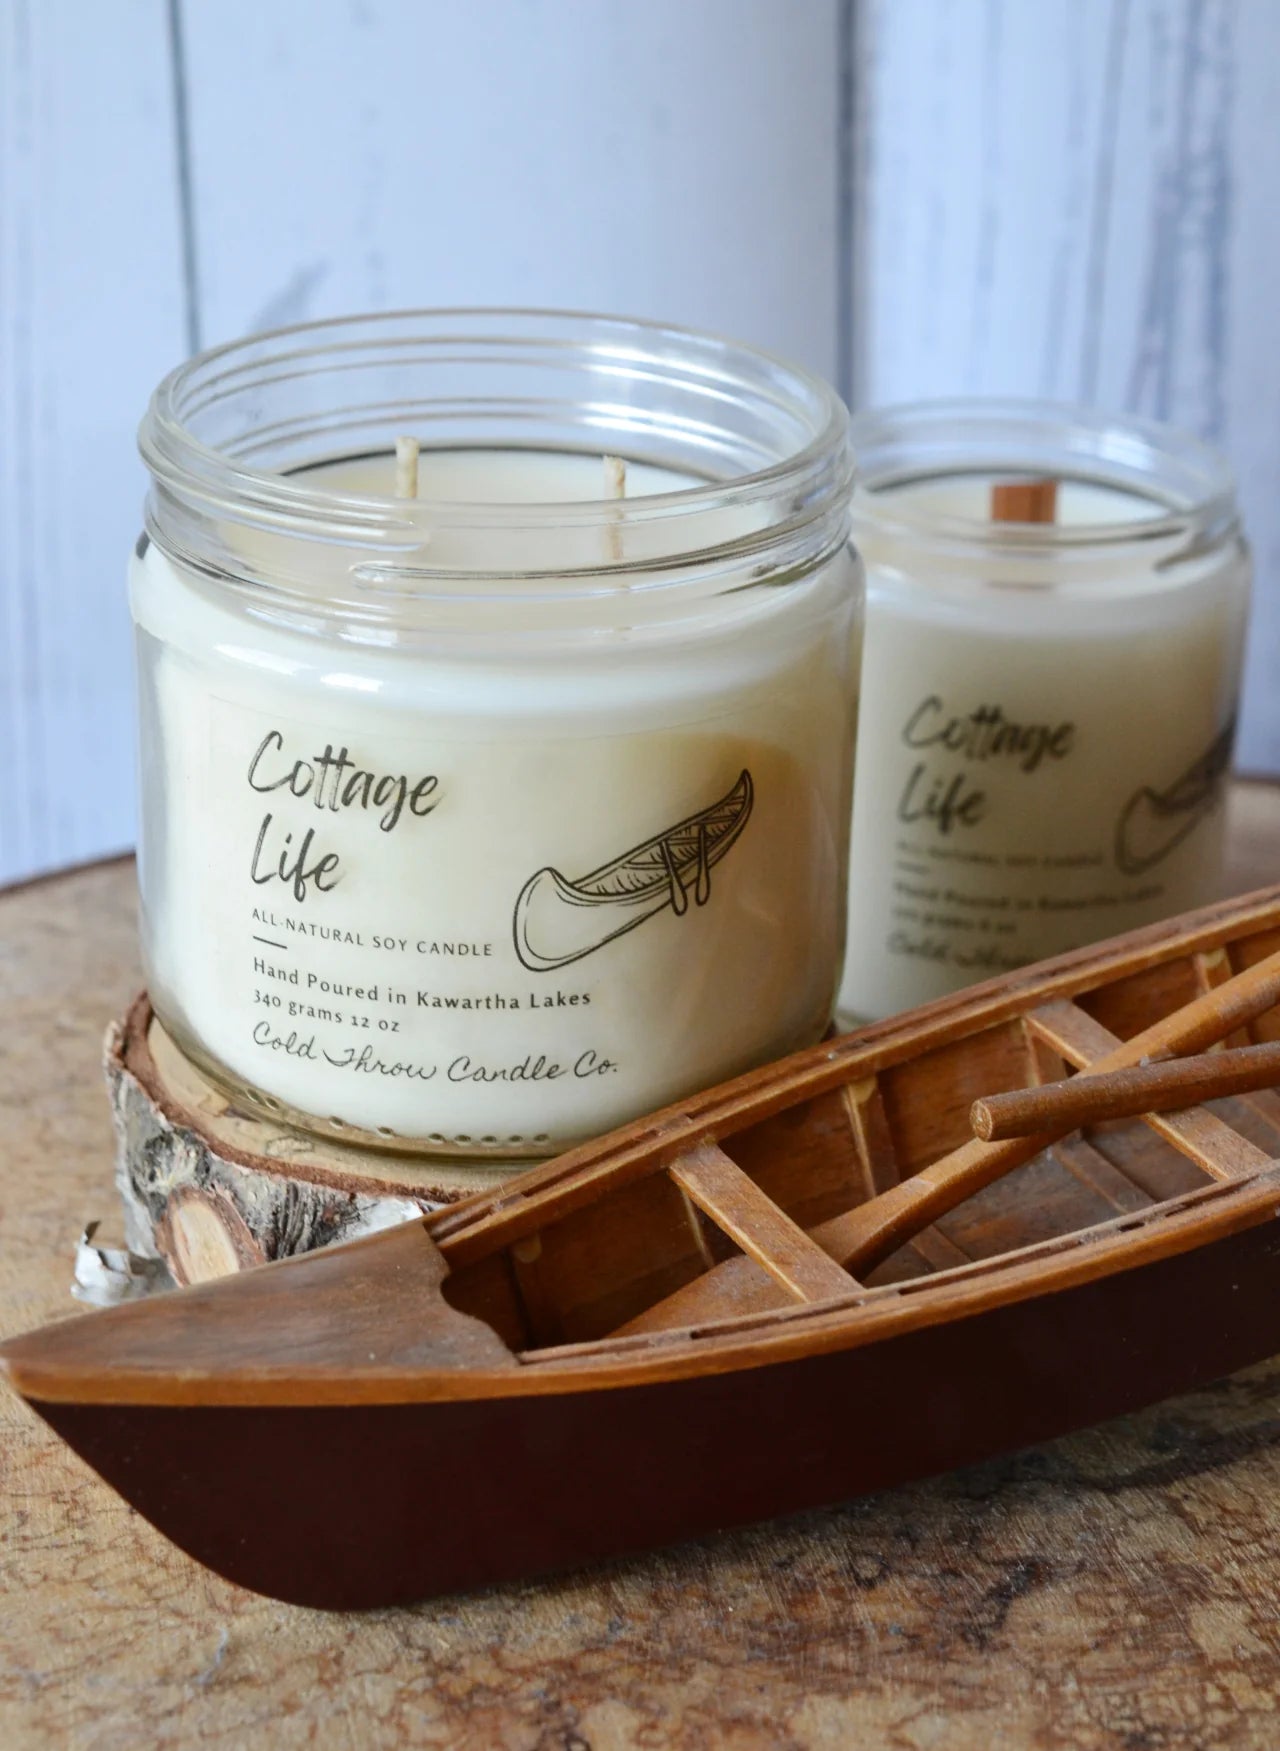 Cold Throw Candle Co. Candles (three scents)